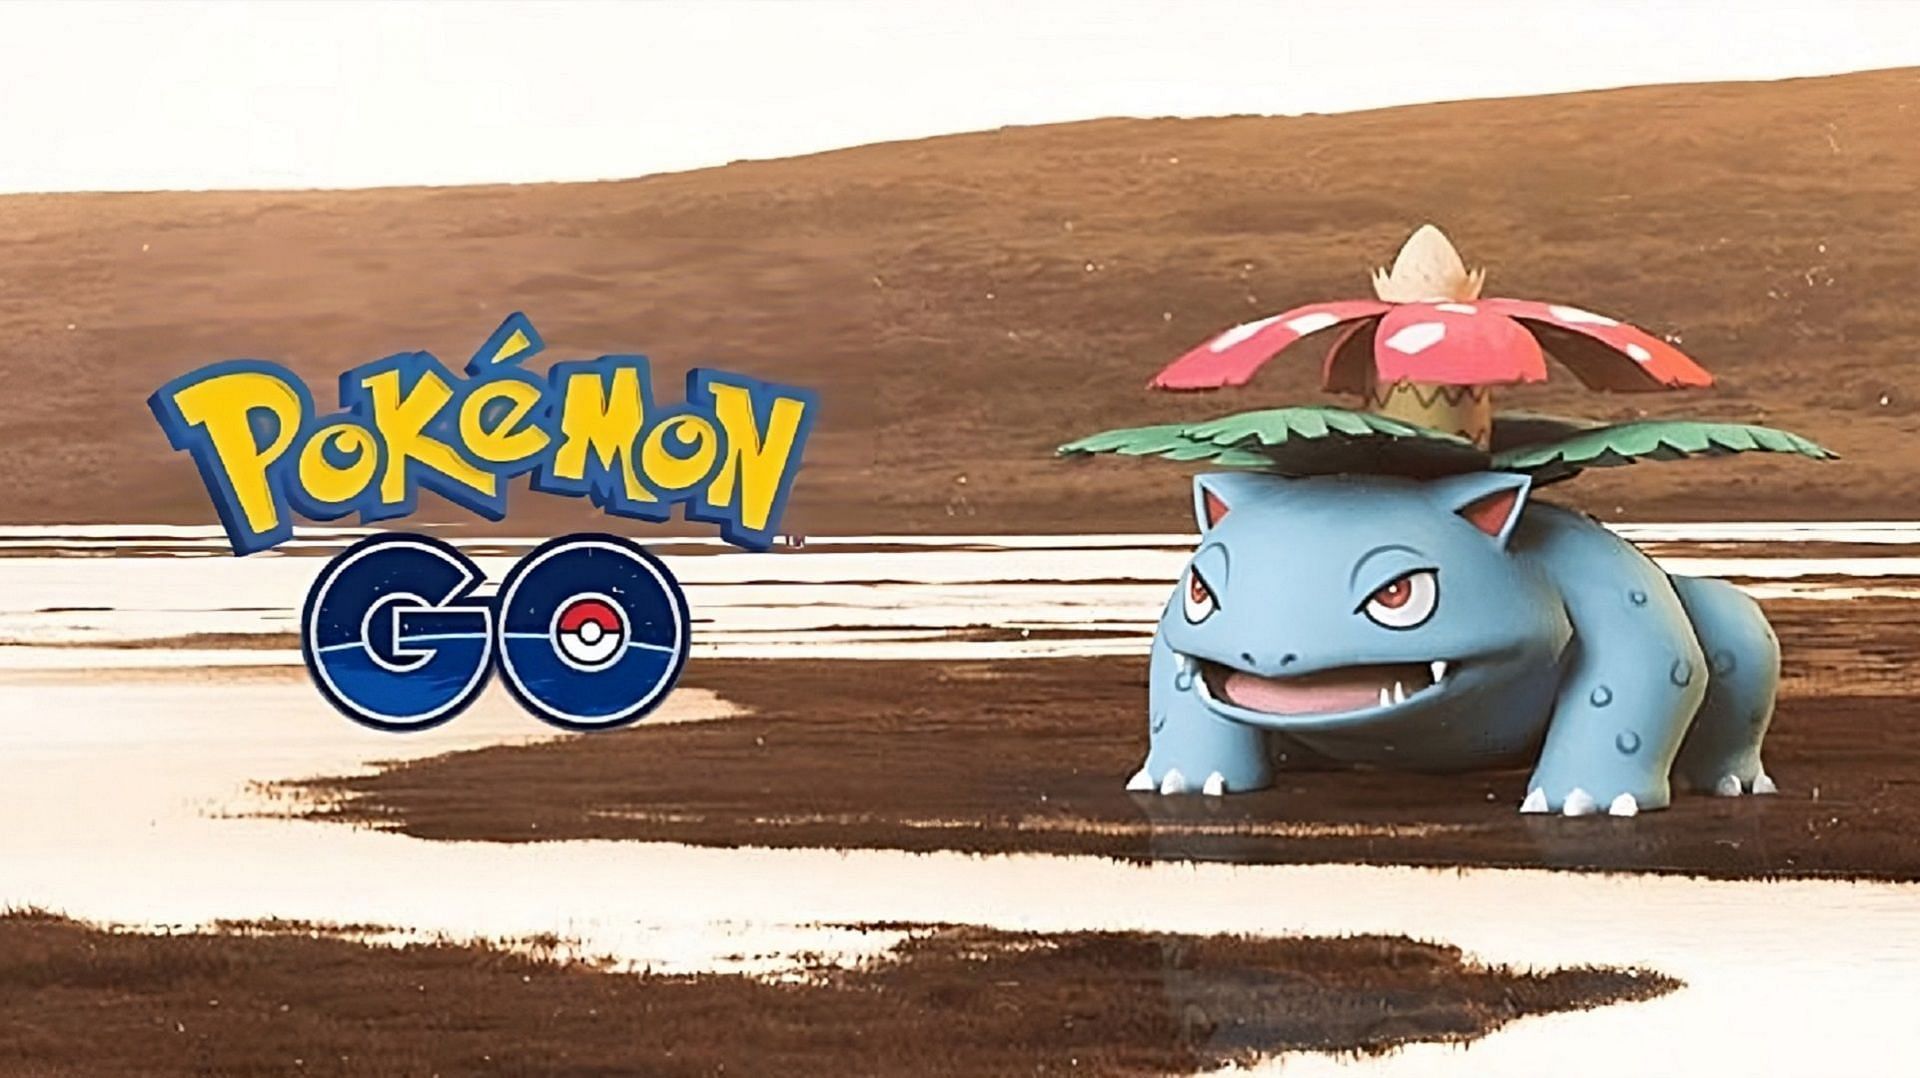 Venusaur remains a capable fighter in multiple Pokemon GO formats (Image via Niantic)